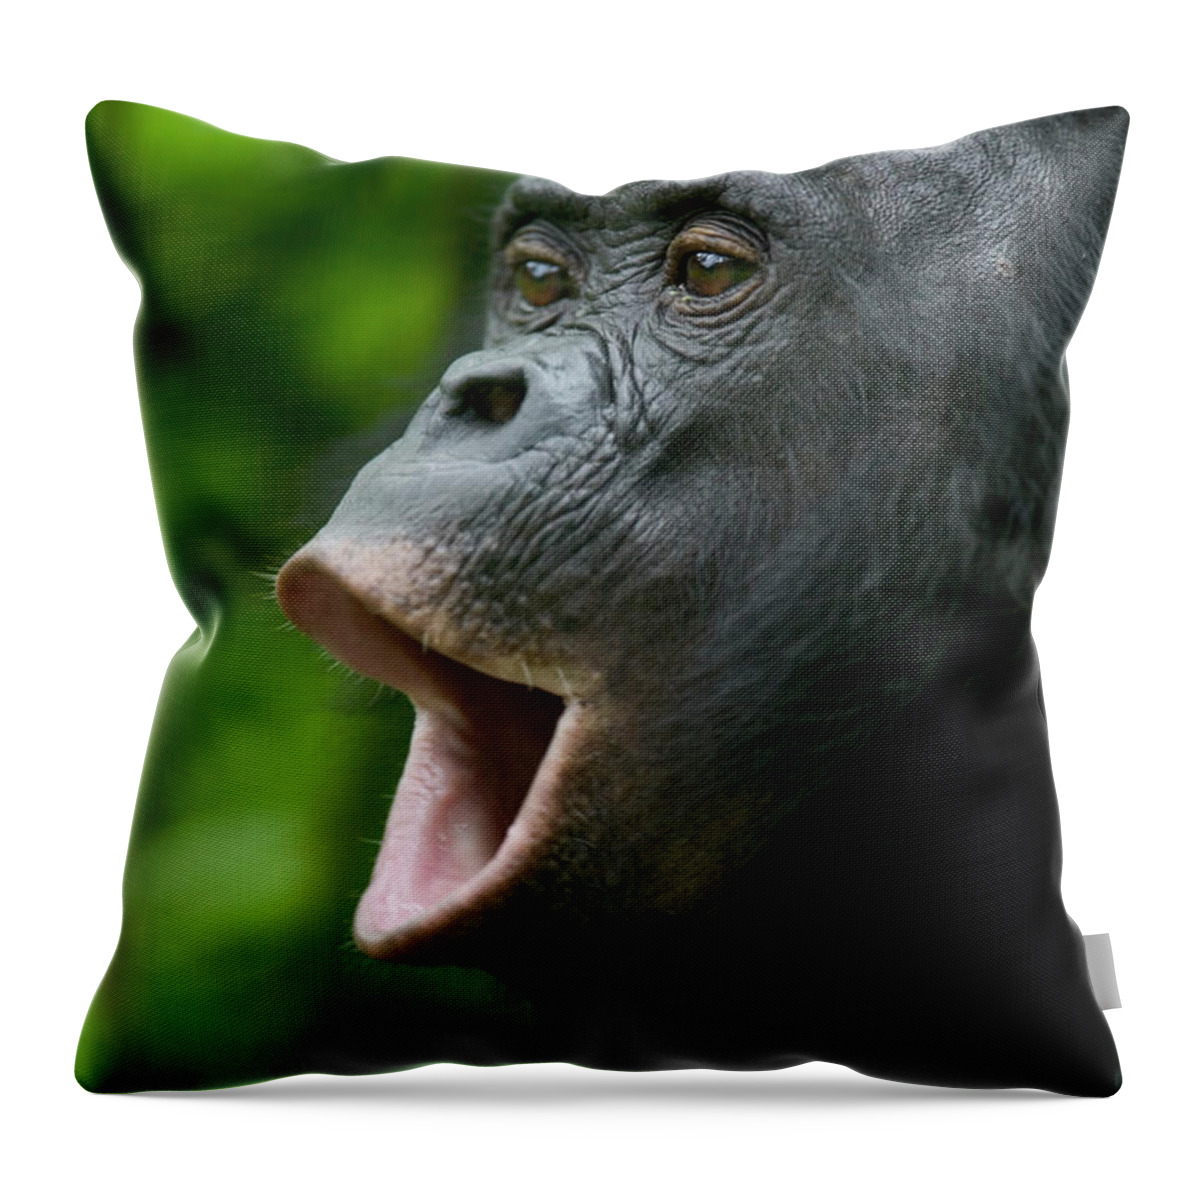 Jh Throw Pillow featuring the photograph Bonobo Female Calling by Cyril Ruoso